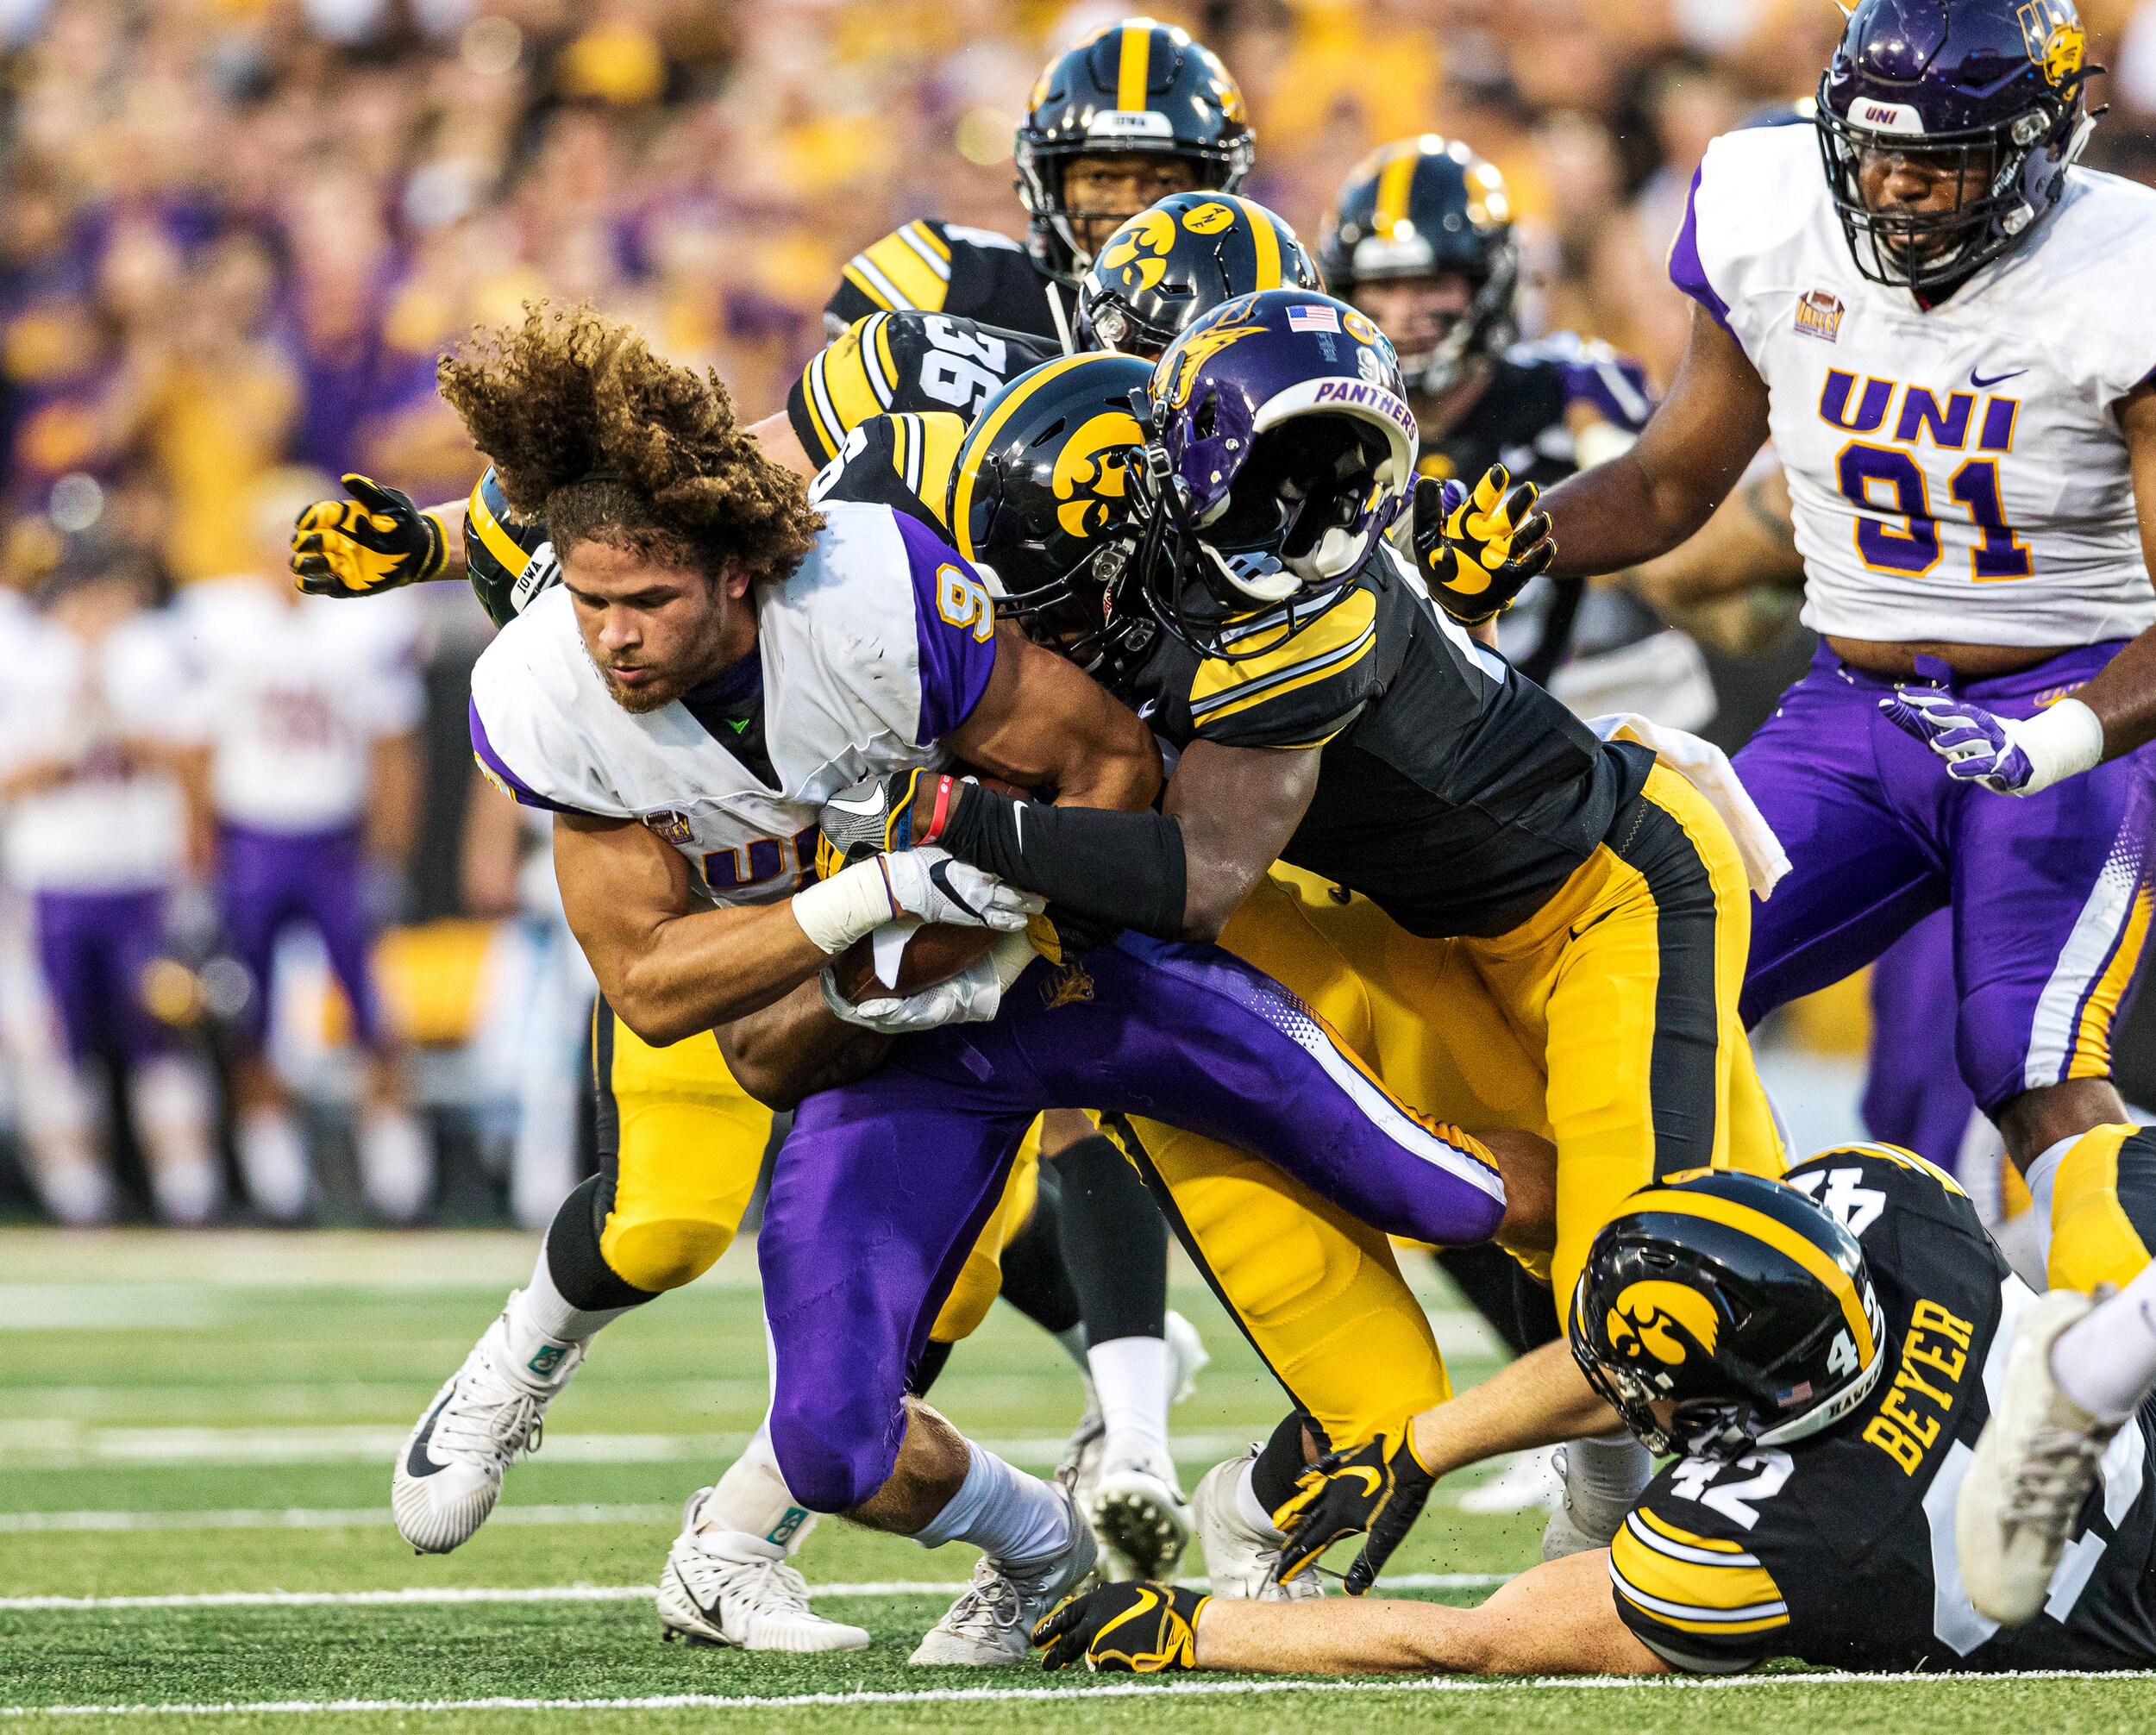  Northern Iowa Panthers punt returner Xavior Williams (9) loses his helmet as he is tackled during a game against Northern Iowa at Kinnick Stadium on Saturday, Sep. 15, 2018. The Hawkeyes defeated the Panthers 38–14.  